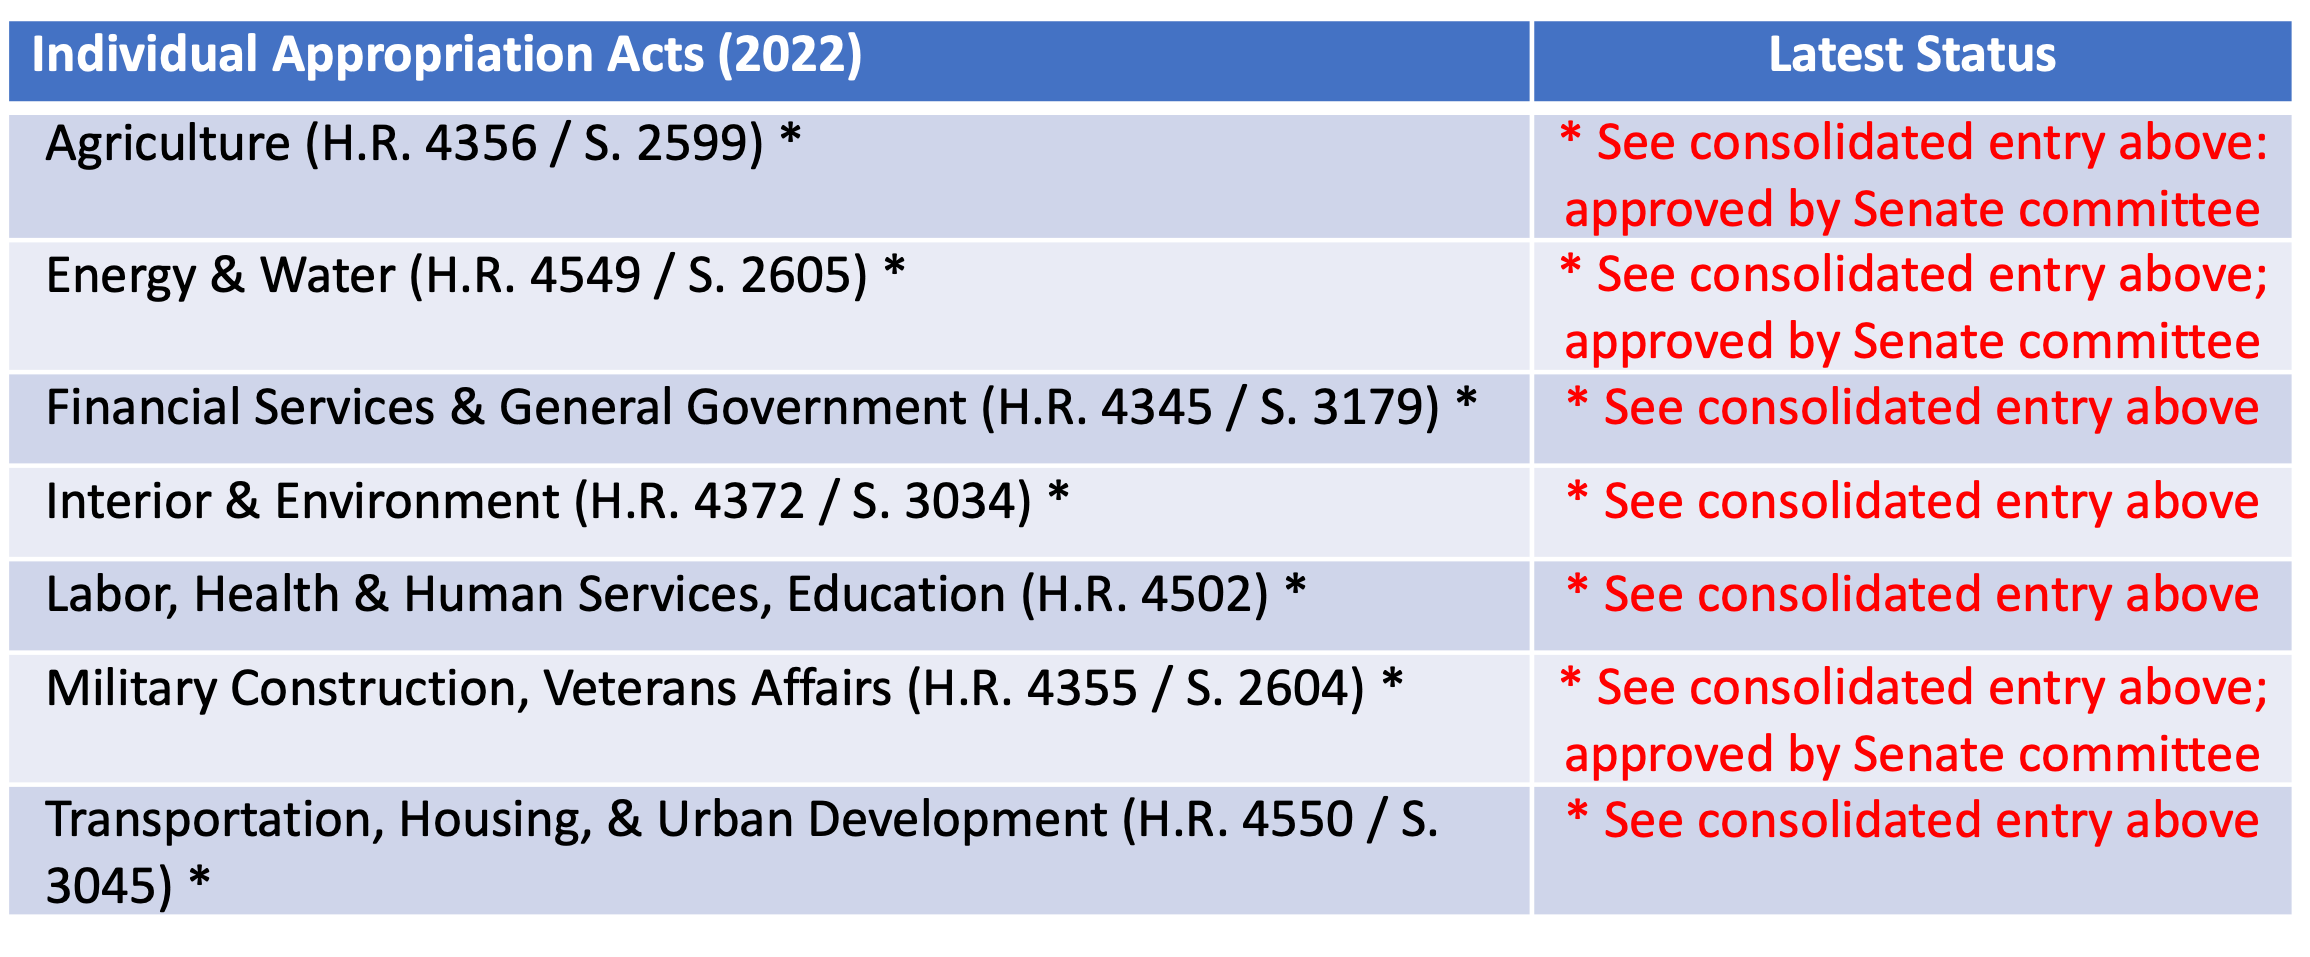 FY 2022 Federal Budget Individual Appropriation Acts